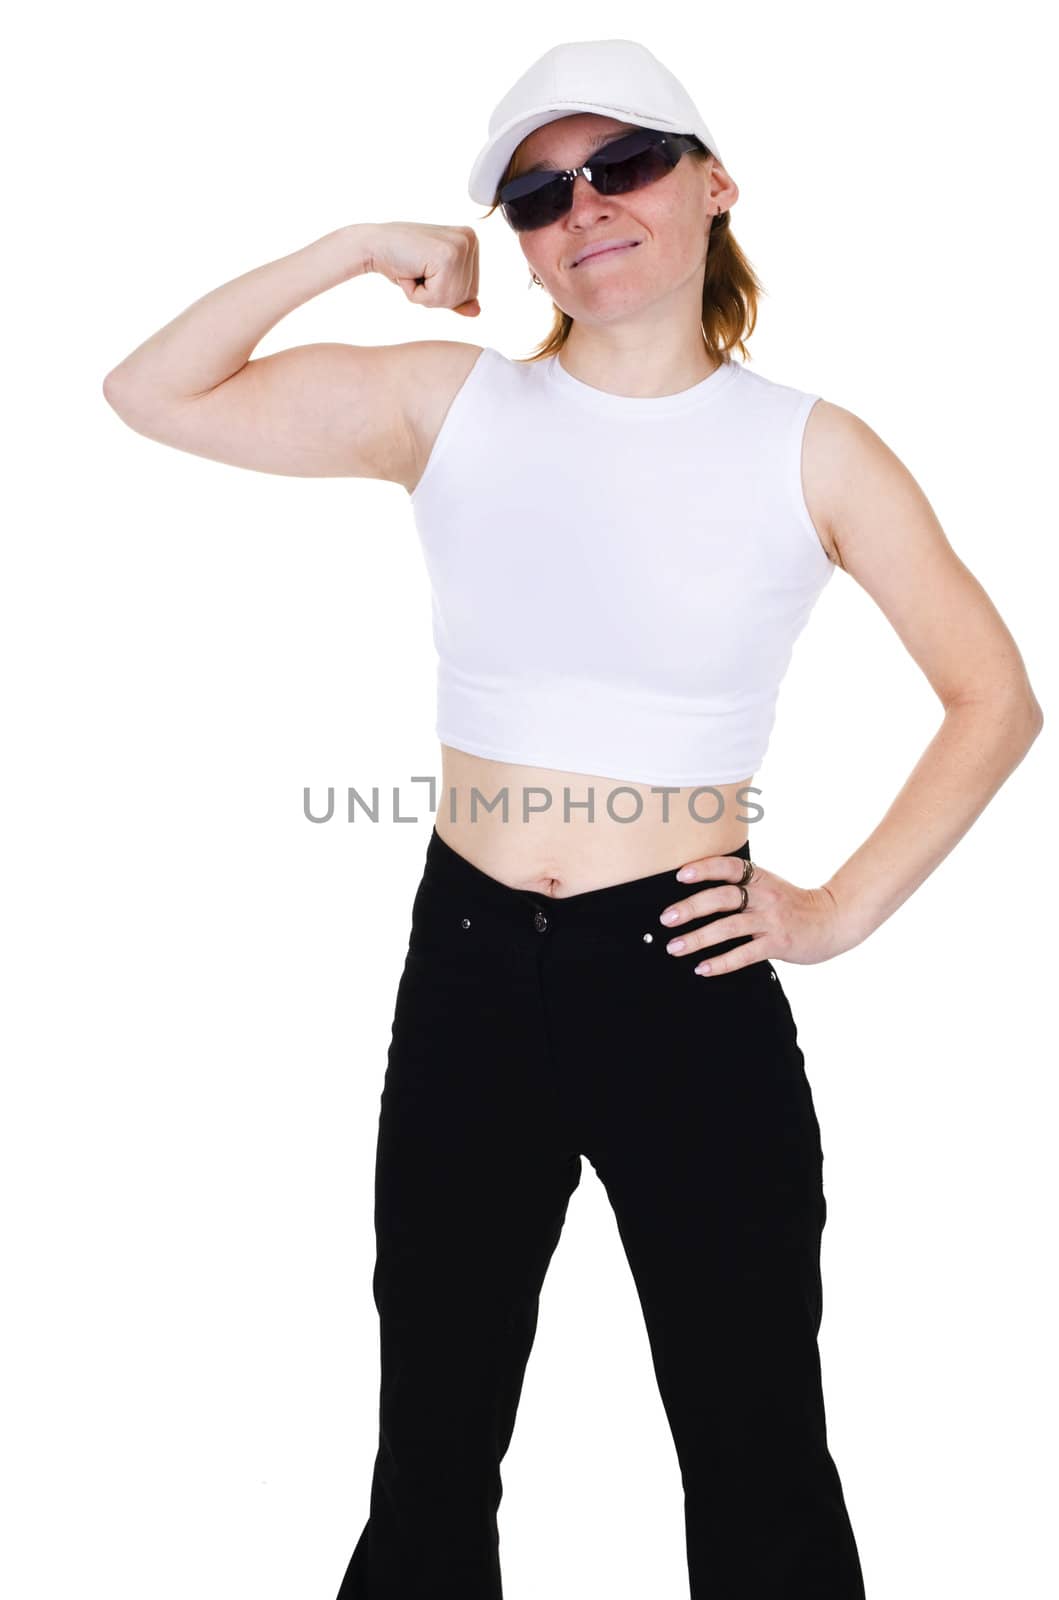 The strong girl in jeans on a white background